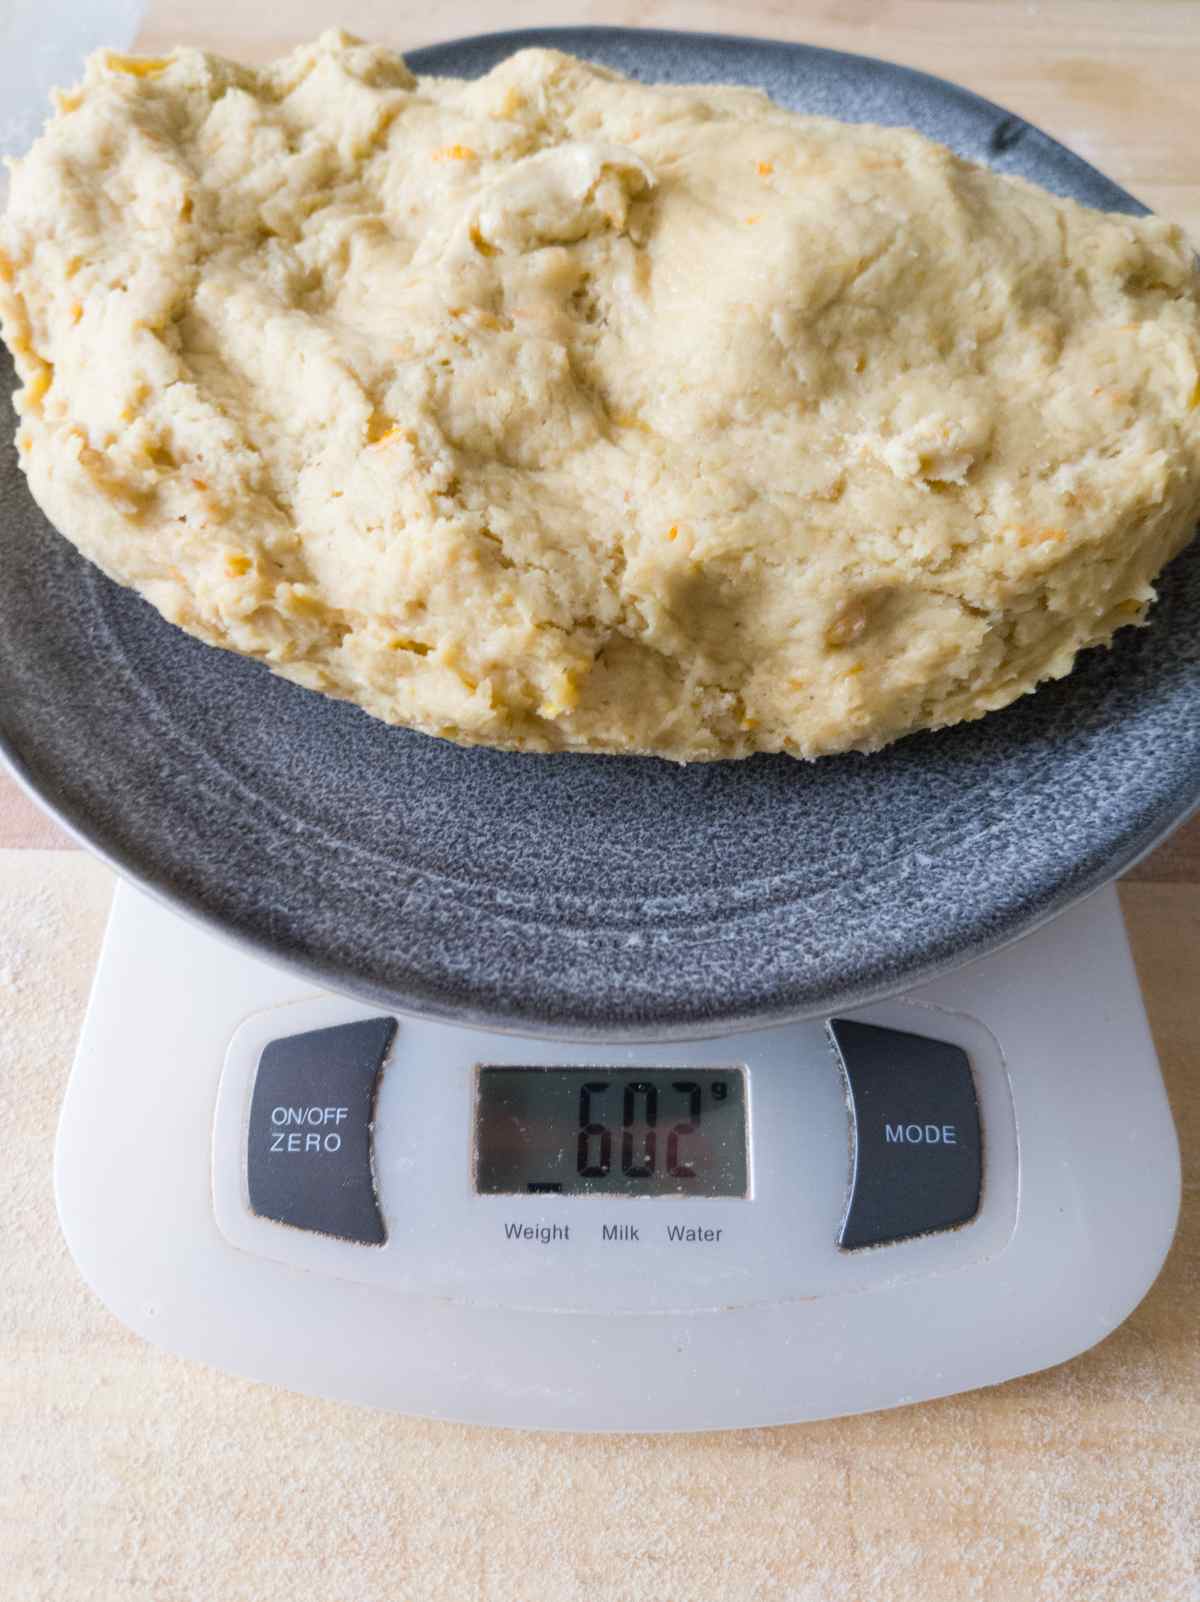 The dough on a plate on a digital kitchen scale.